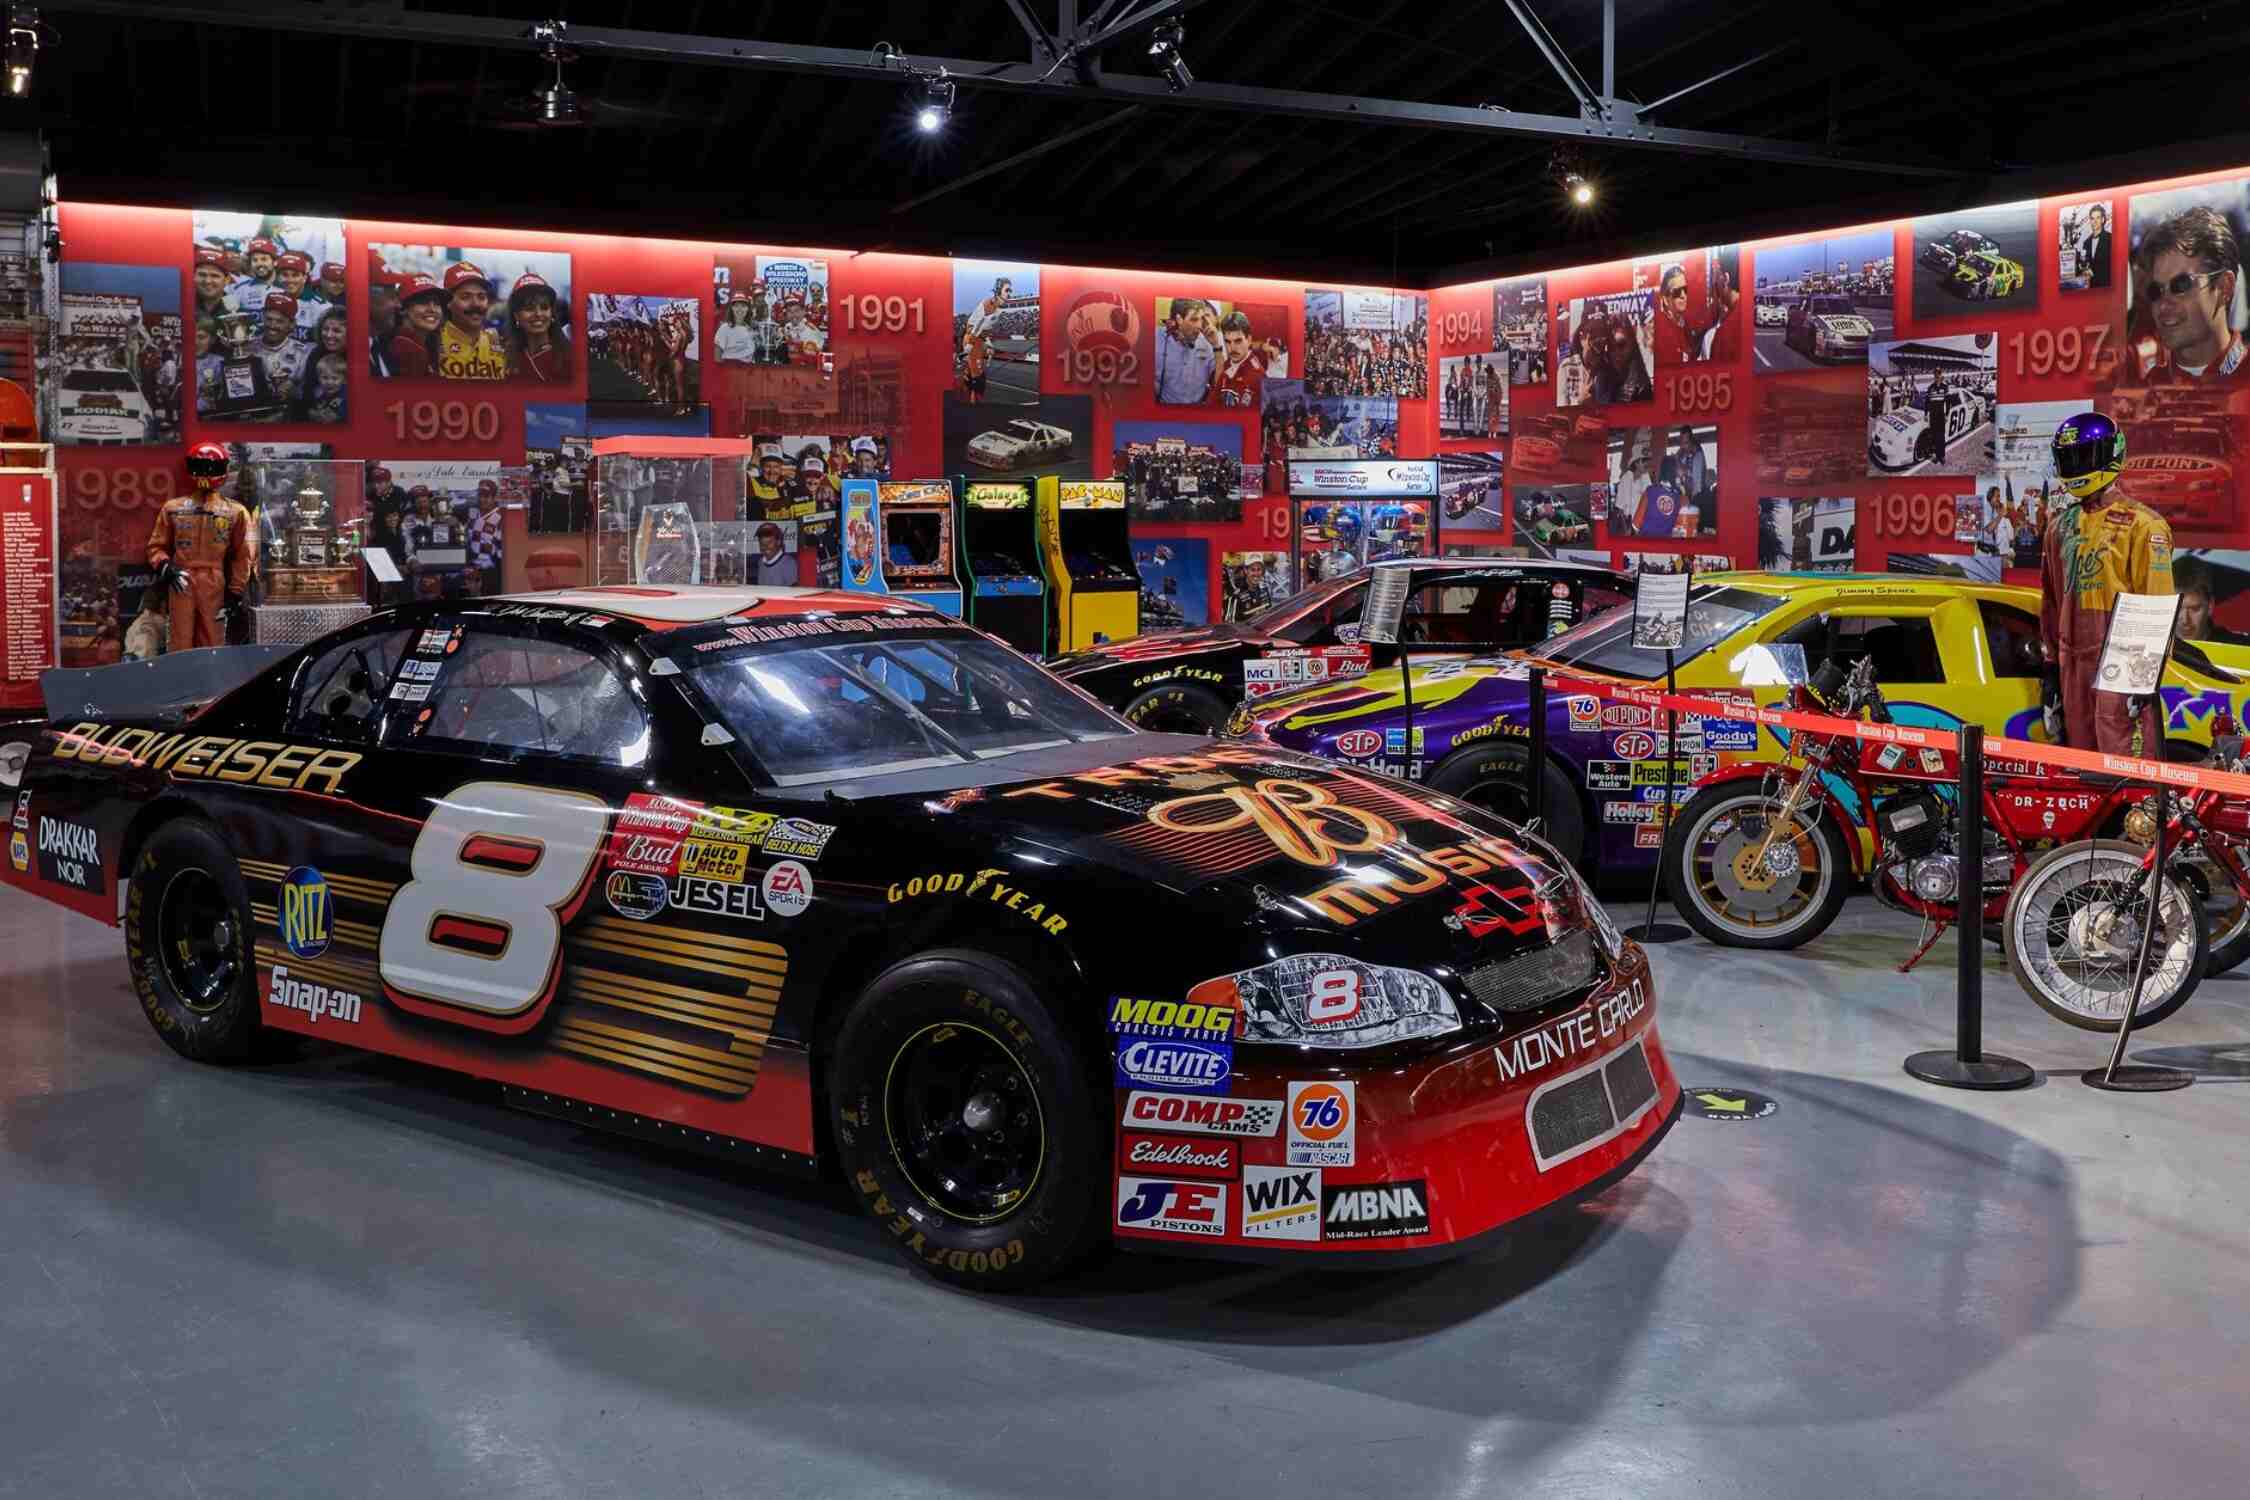 The Winston Cup Museum & Special Event Center